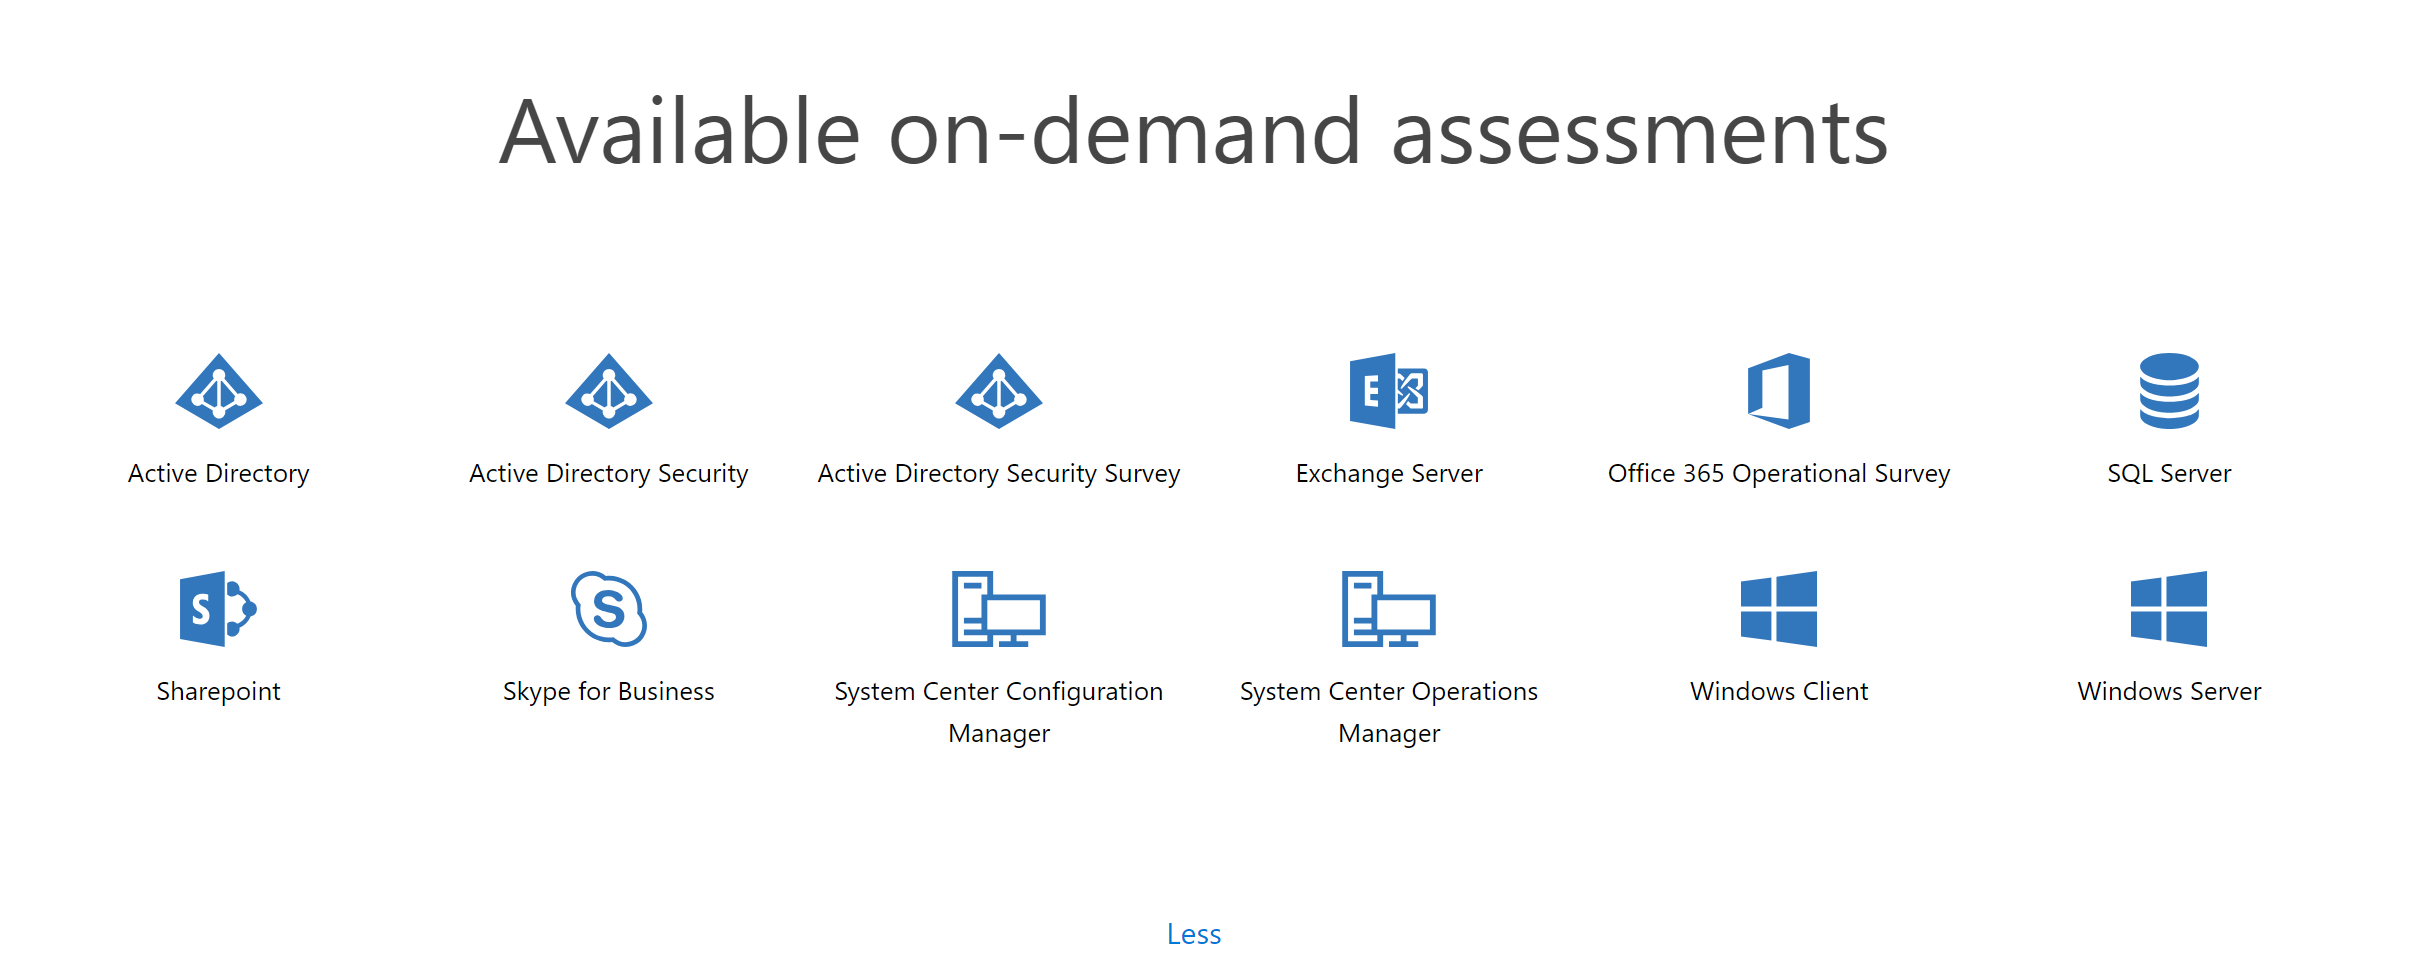 Available On-Demand Assessments with listing of available items such as SharePoint, Entra ID, Exchange Server, etc.